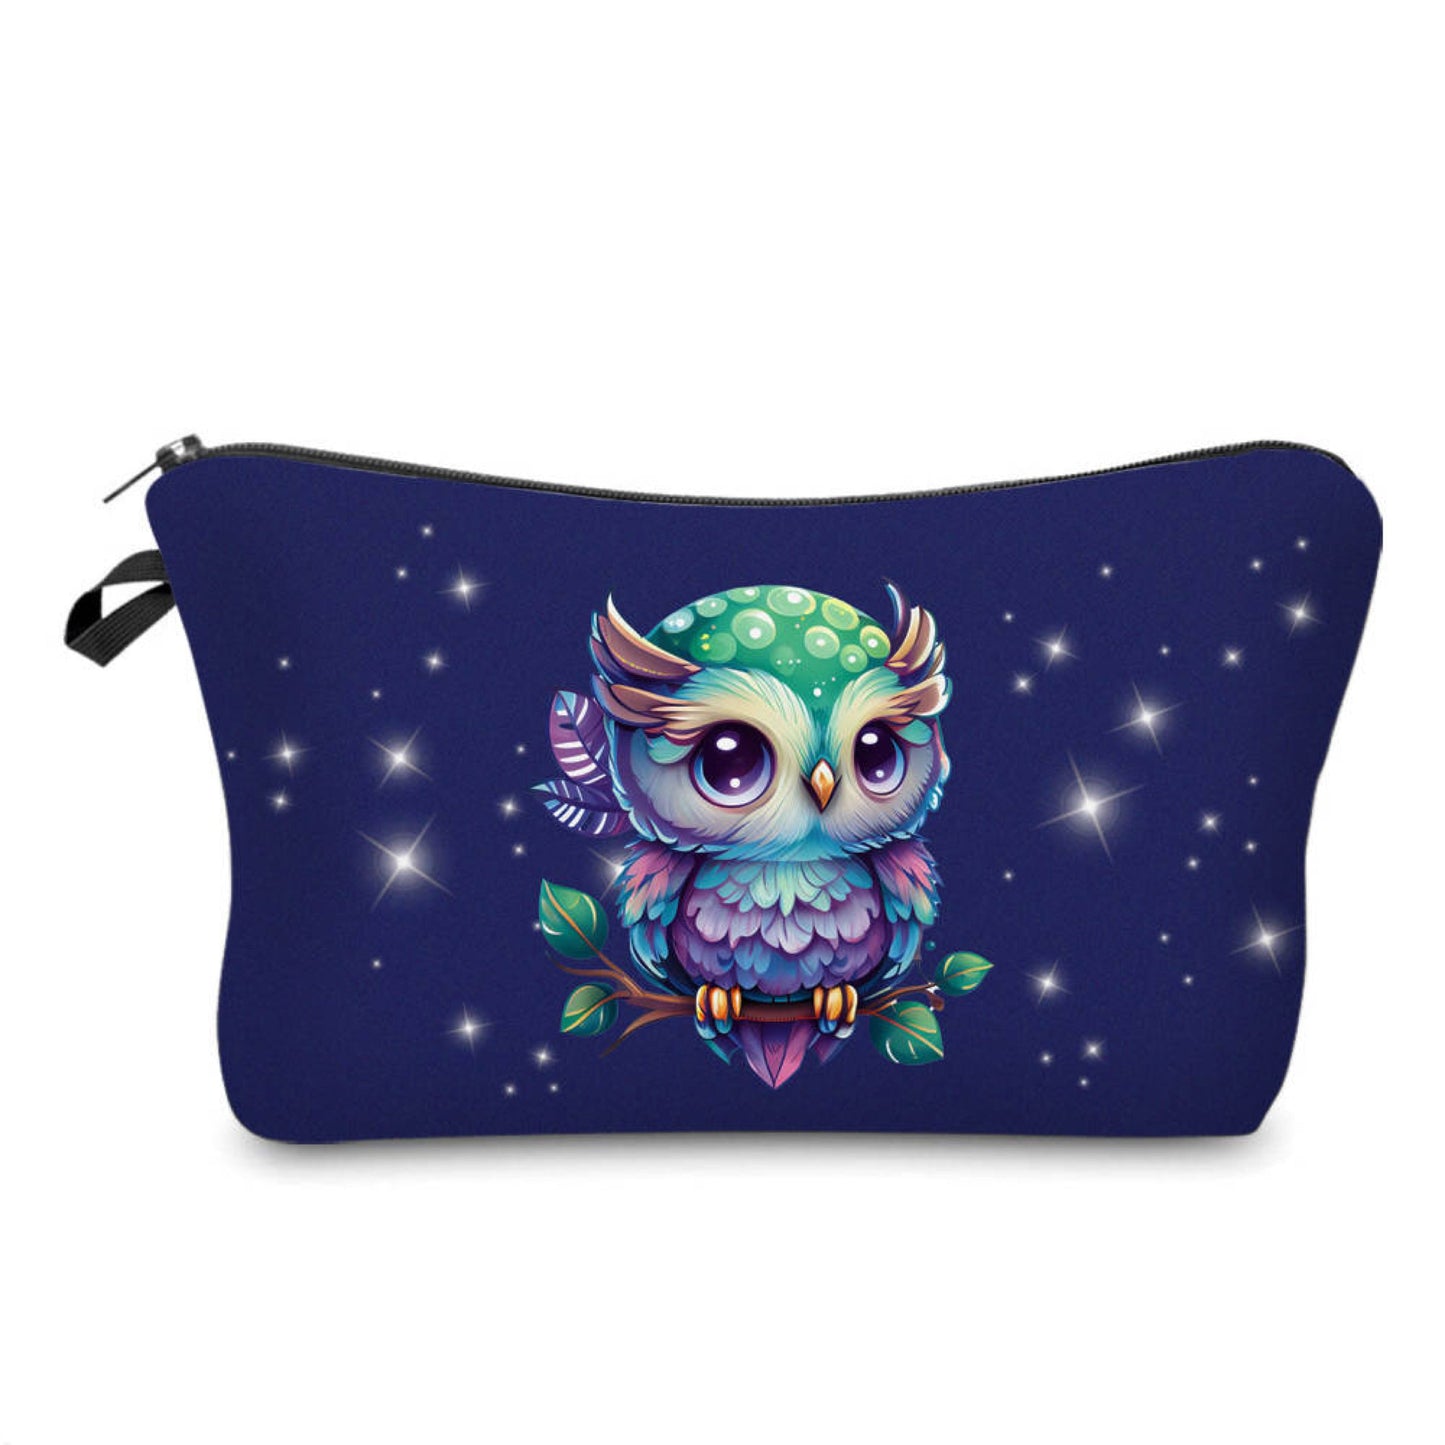 Night Owl - Water-Resistant Multi-Use Pouch